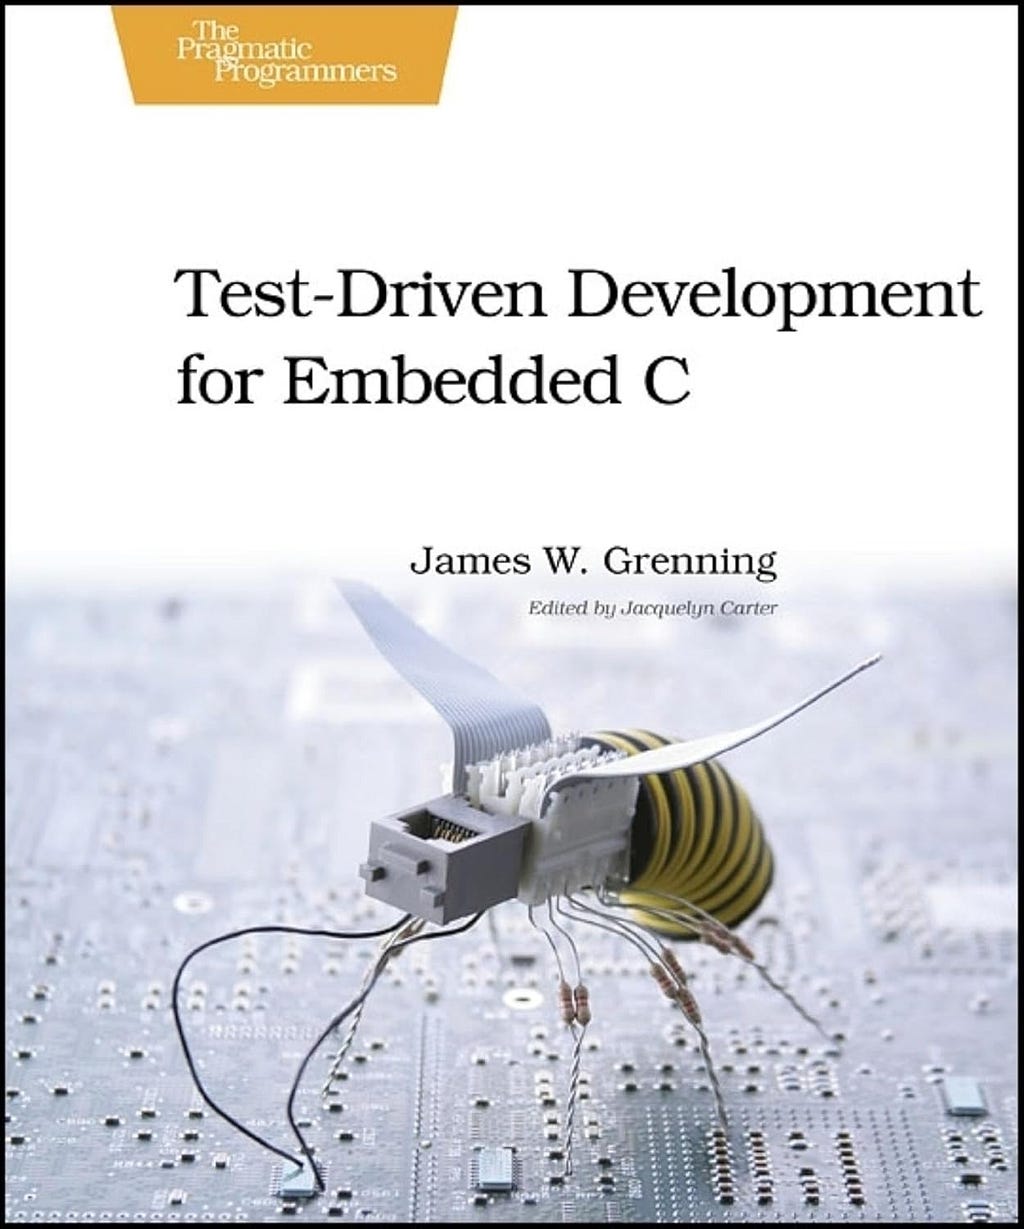 Test Driven Development for Embedded C Book by James W. Grenning | Embedded System Roadmap blog by Umer Farooq.